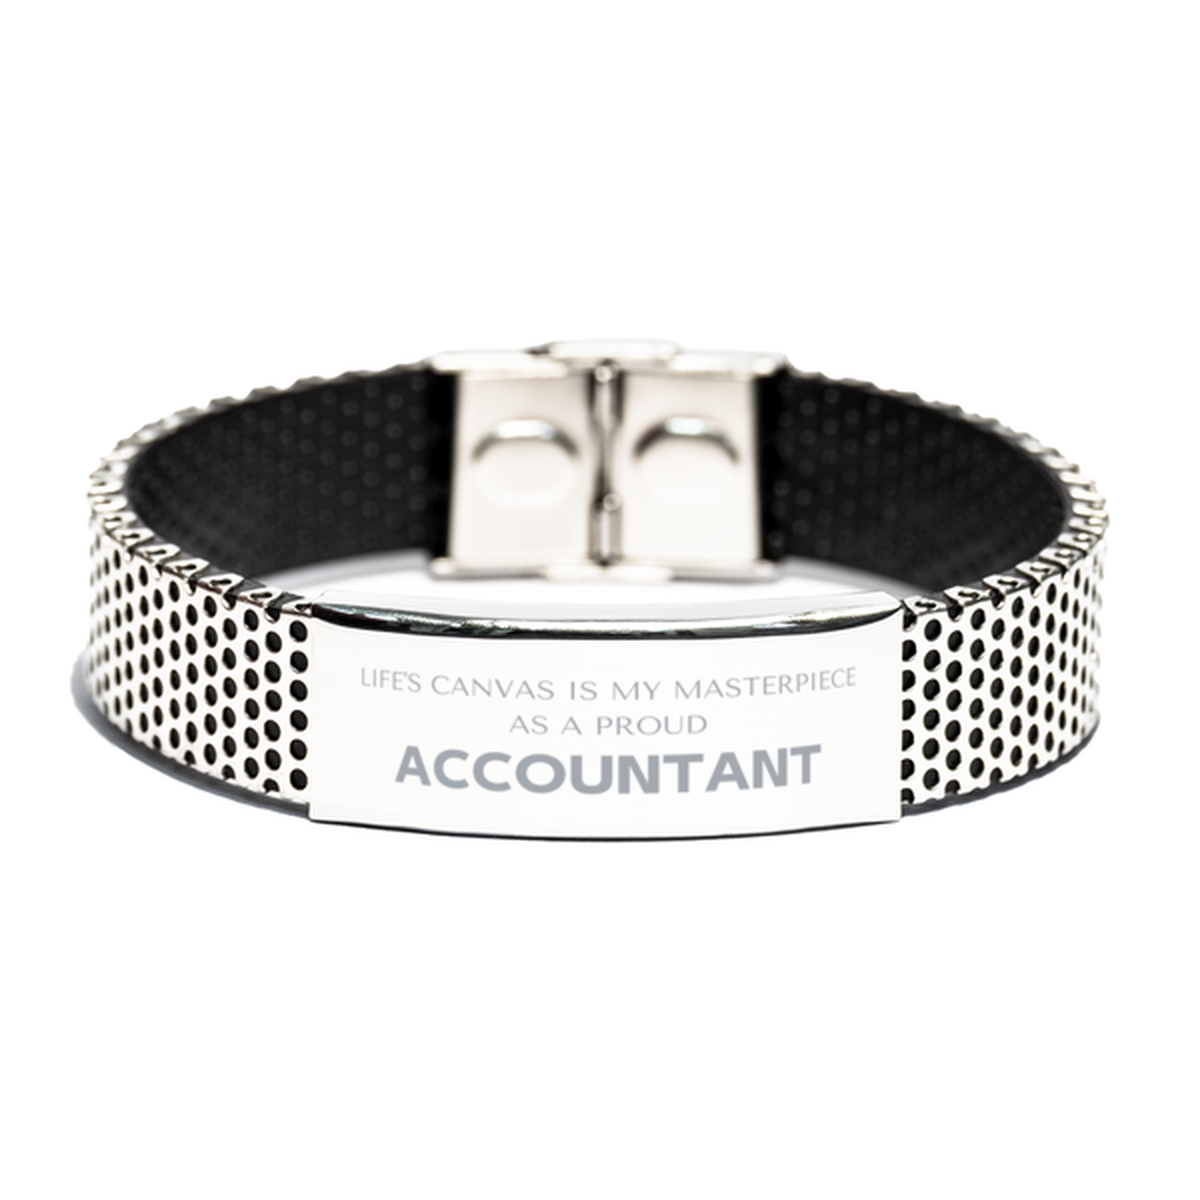 Proud Accountant Gifts, Life's canvas is my masterpiece, Epic Birthday Christmas Unique Stainless Steel Bracelet For Accountant, Coworkers, Men, Women, Friends